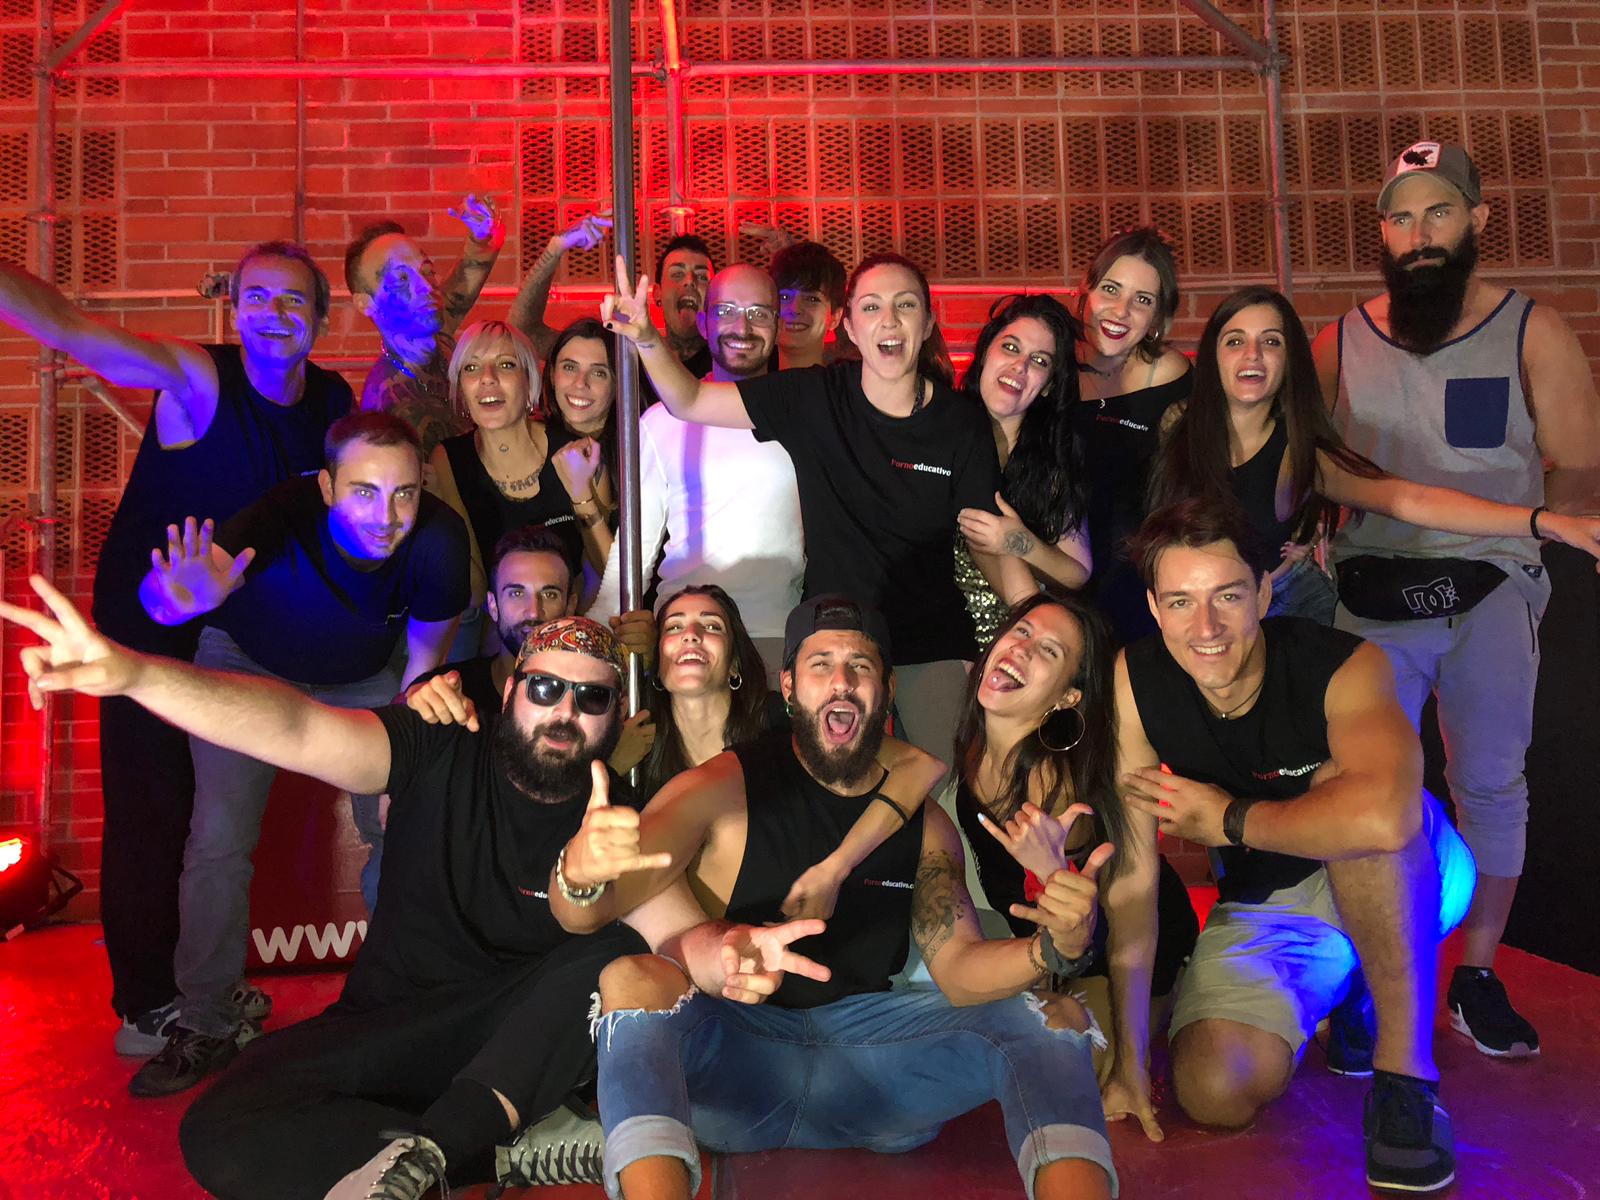 Thanks to all the team of Pornoeducativo in the Erotic Salon of Barcelona 2018